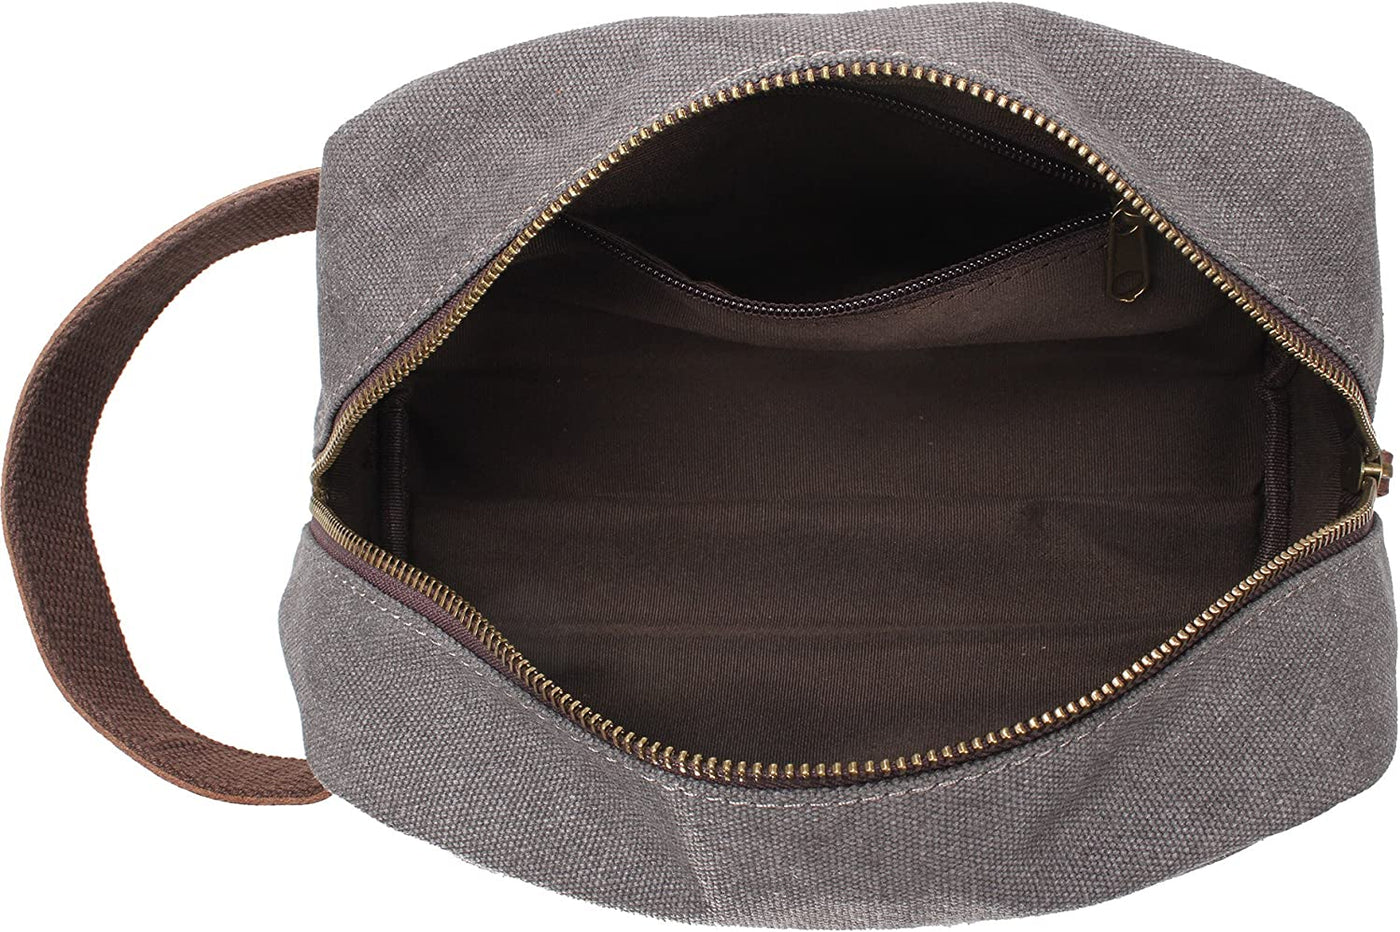 Vintage Leather Canvas Travel Toiletry Bag